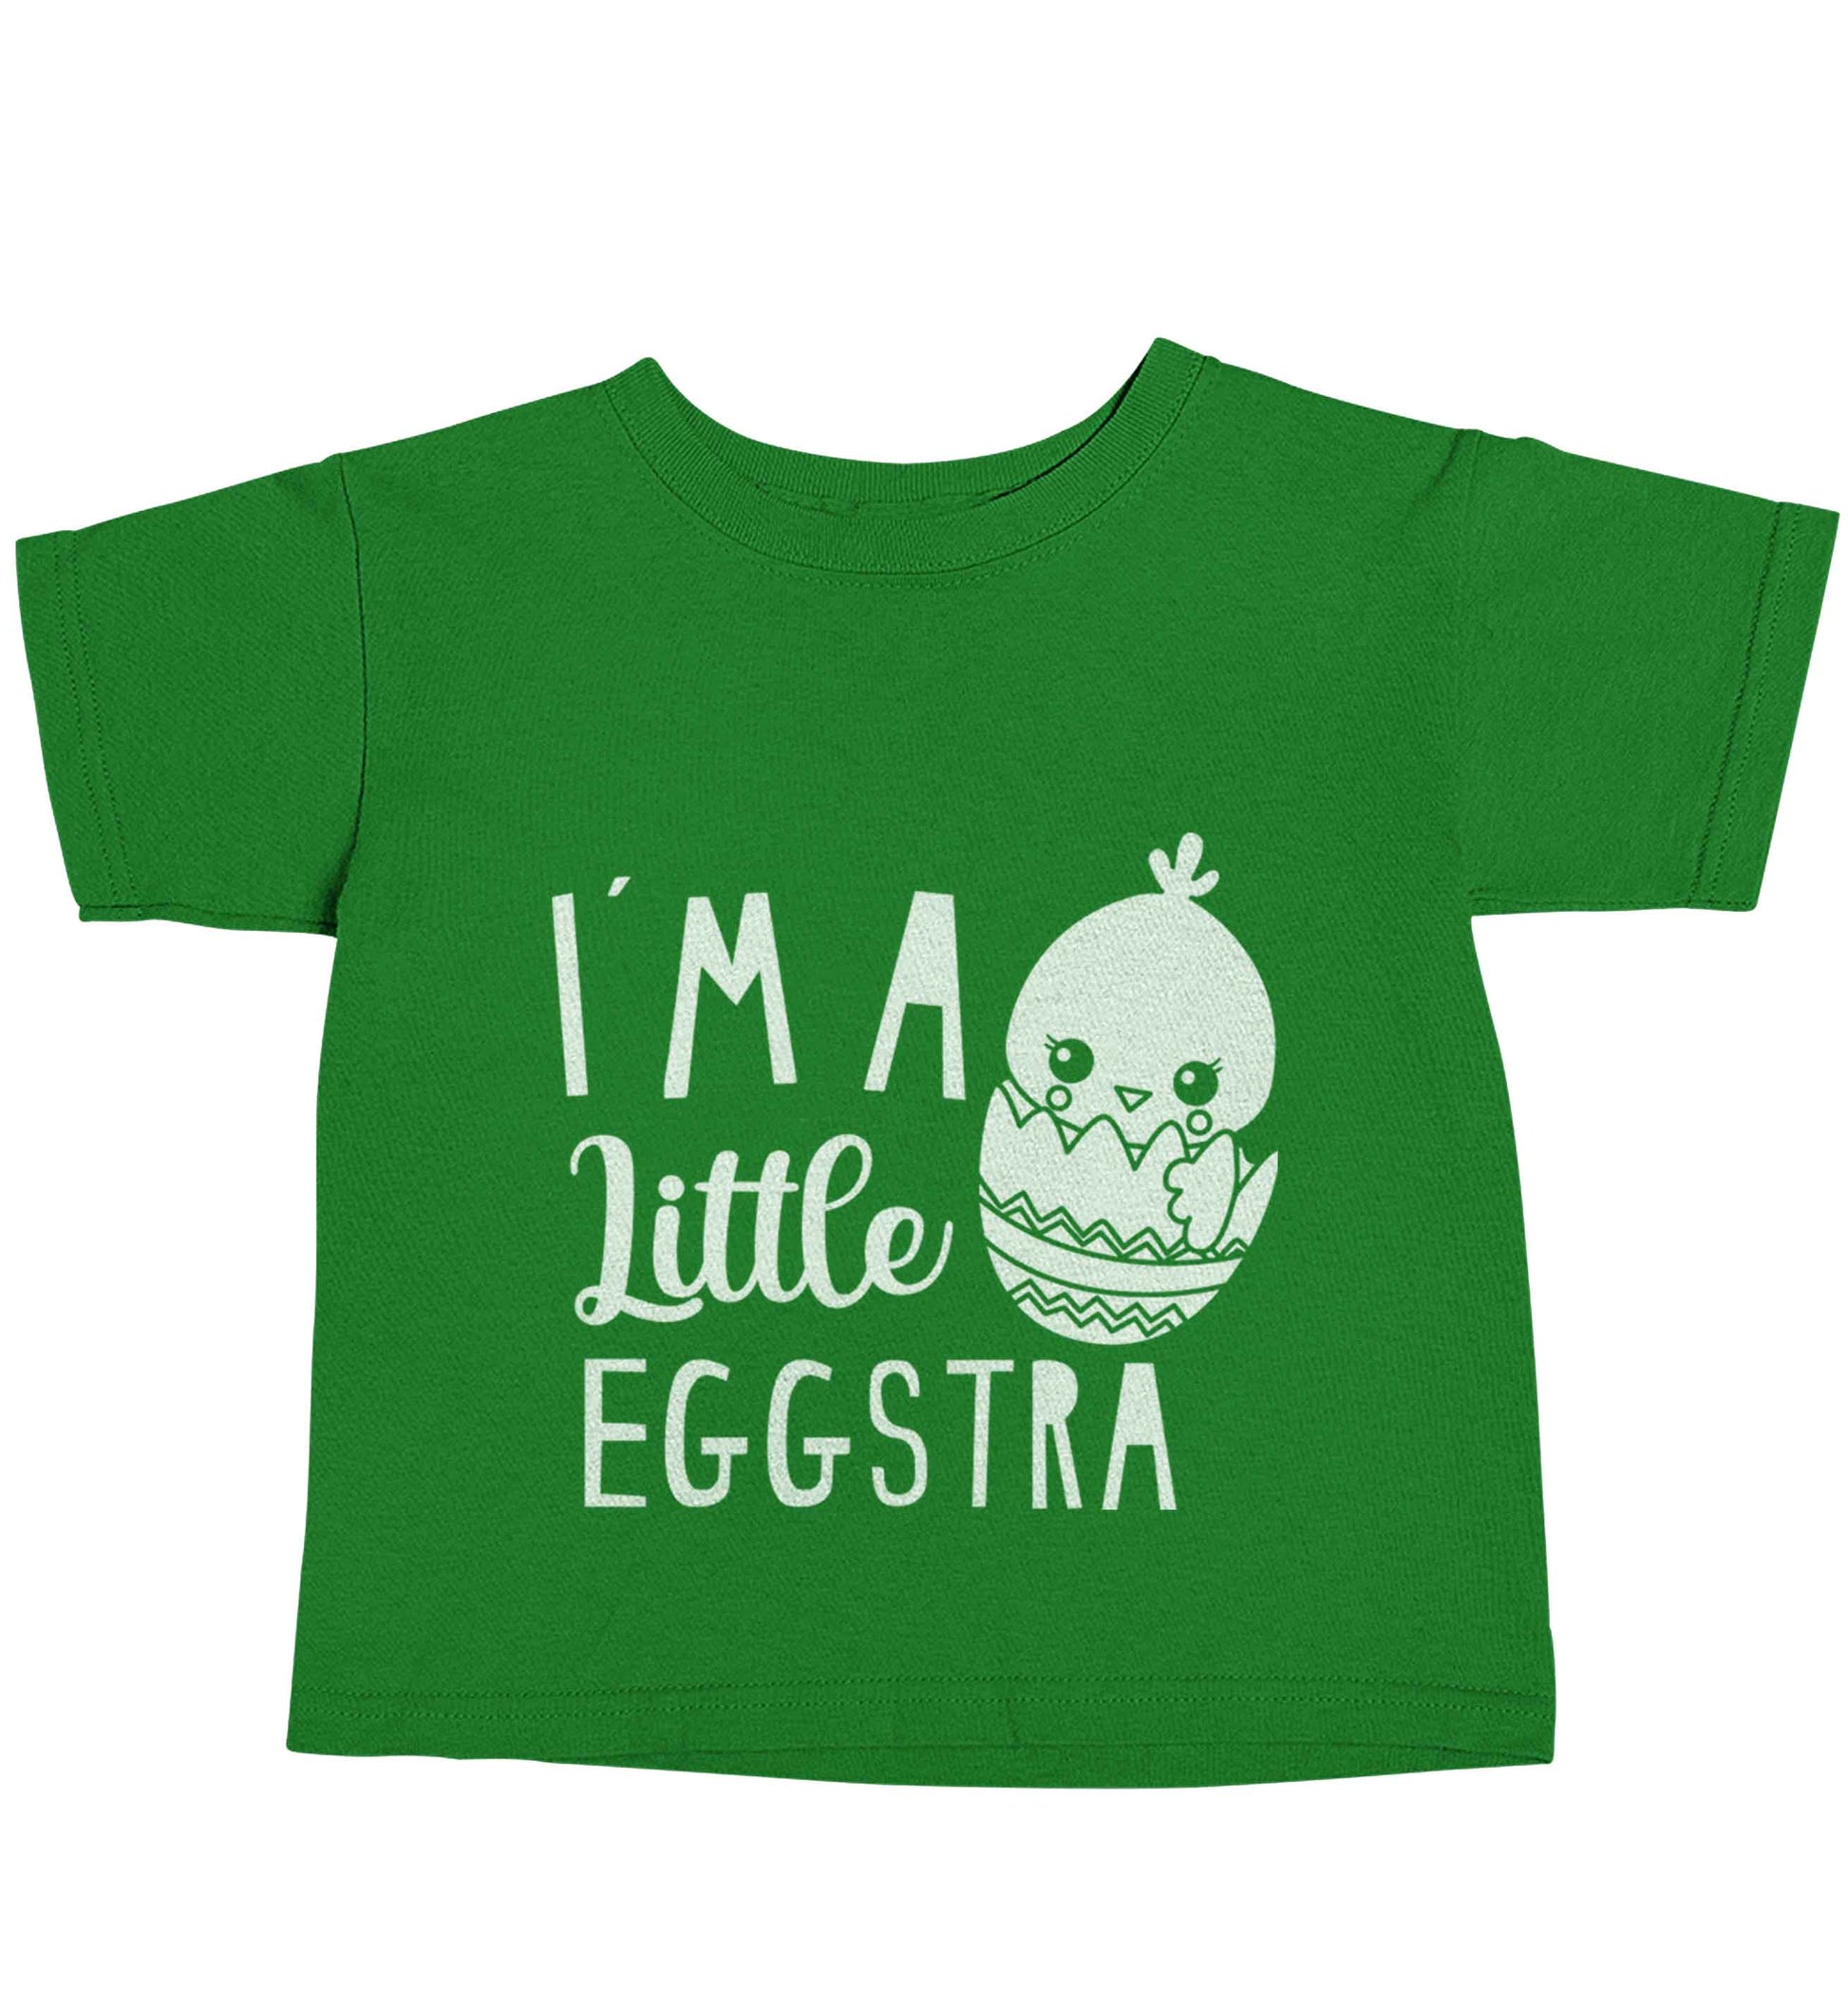 I'm a little eggstra green baby toddler Tshirt 2 Years